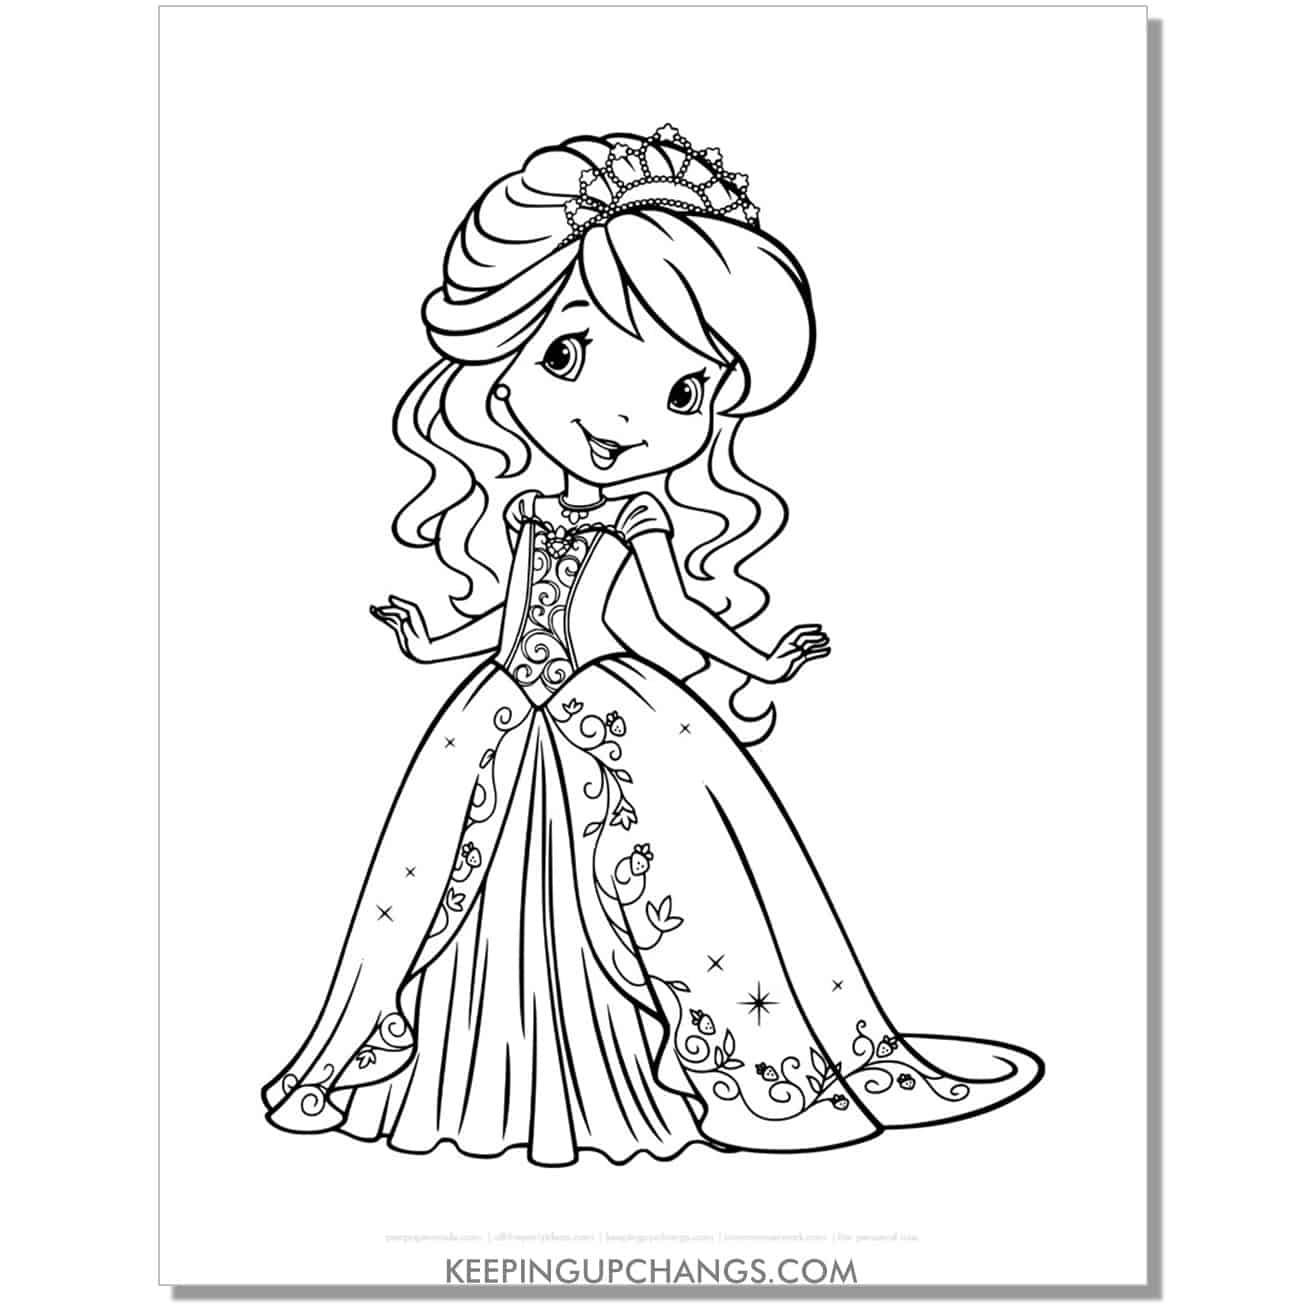 free princess gown strawberry shortcake coloring page, sheet.